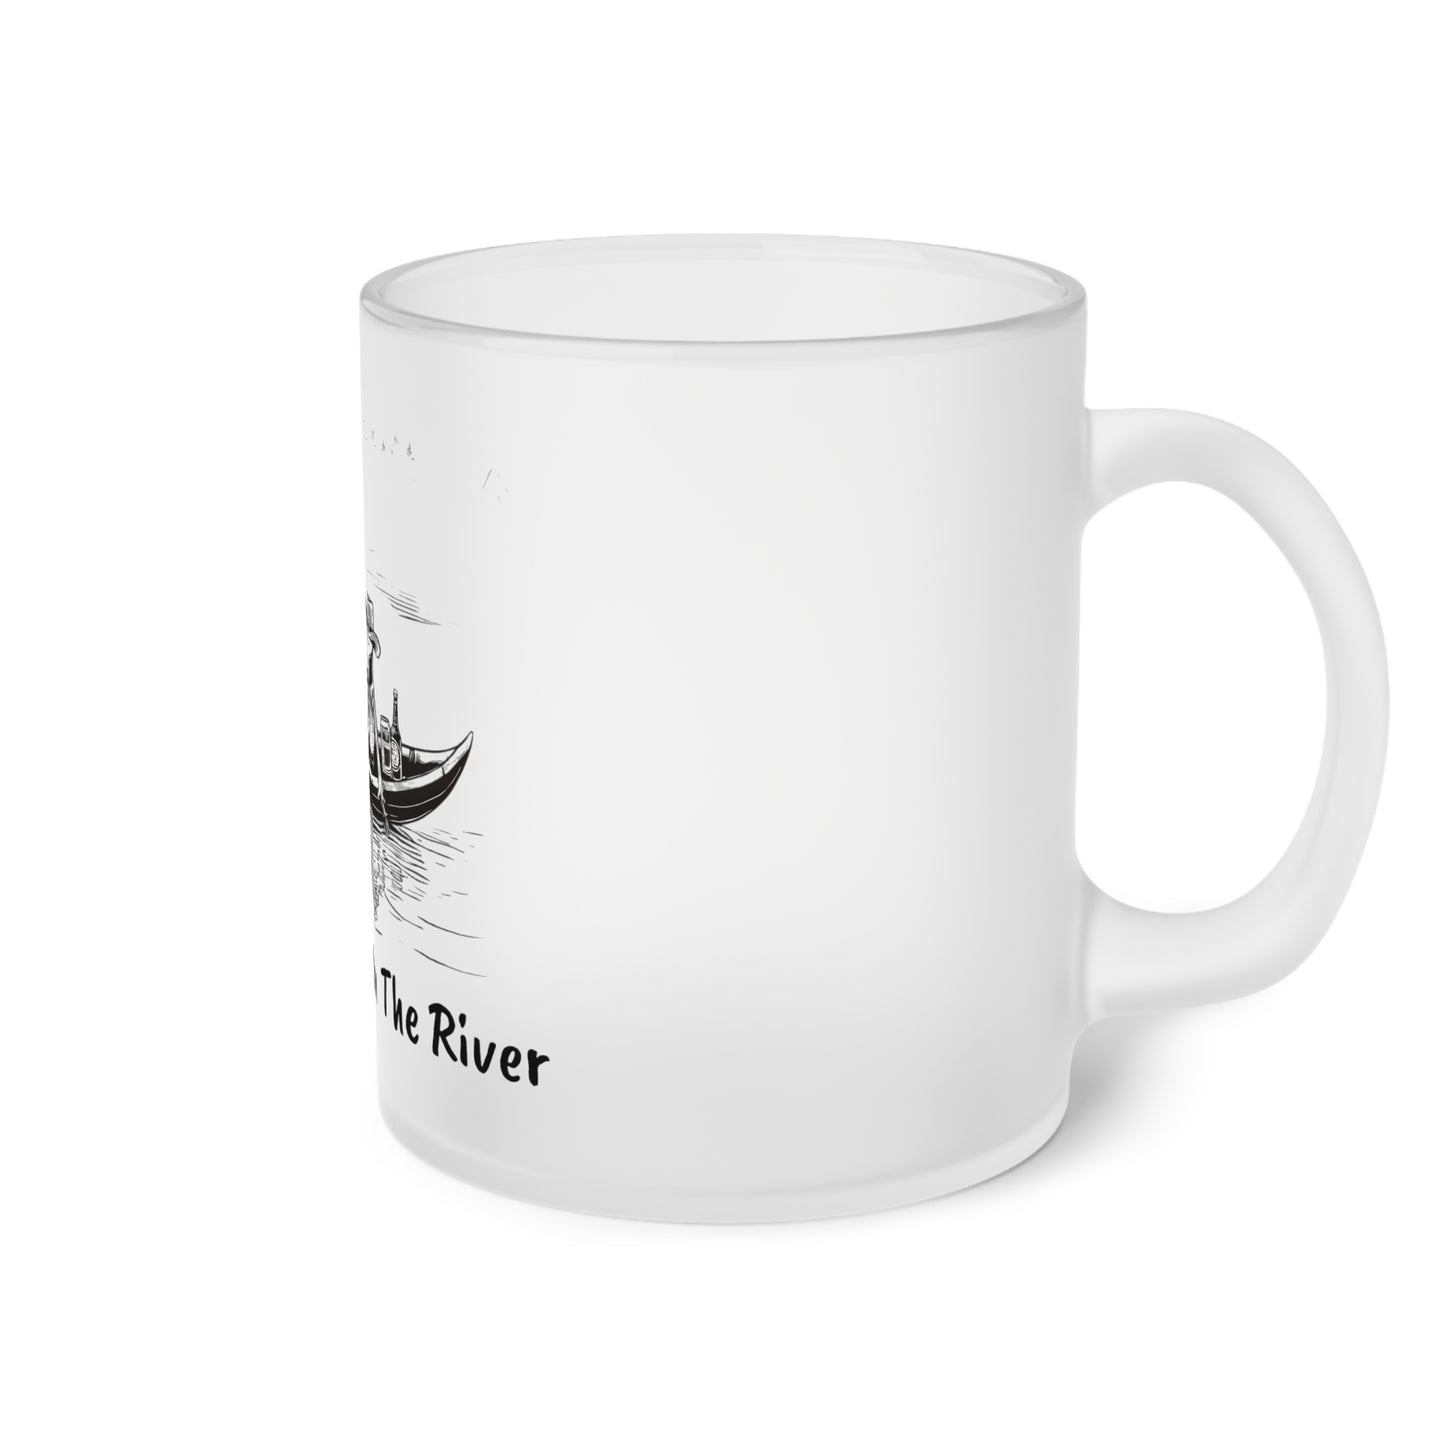 Life Is Better on The River Lizzard. Frosted Glass Mug